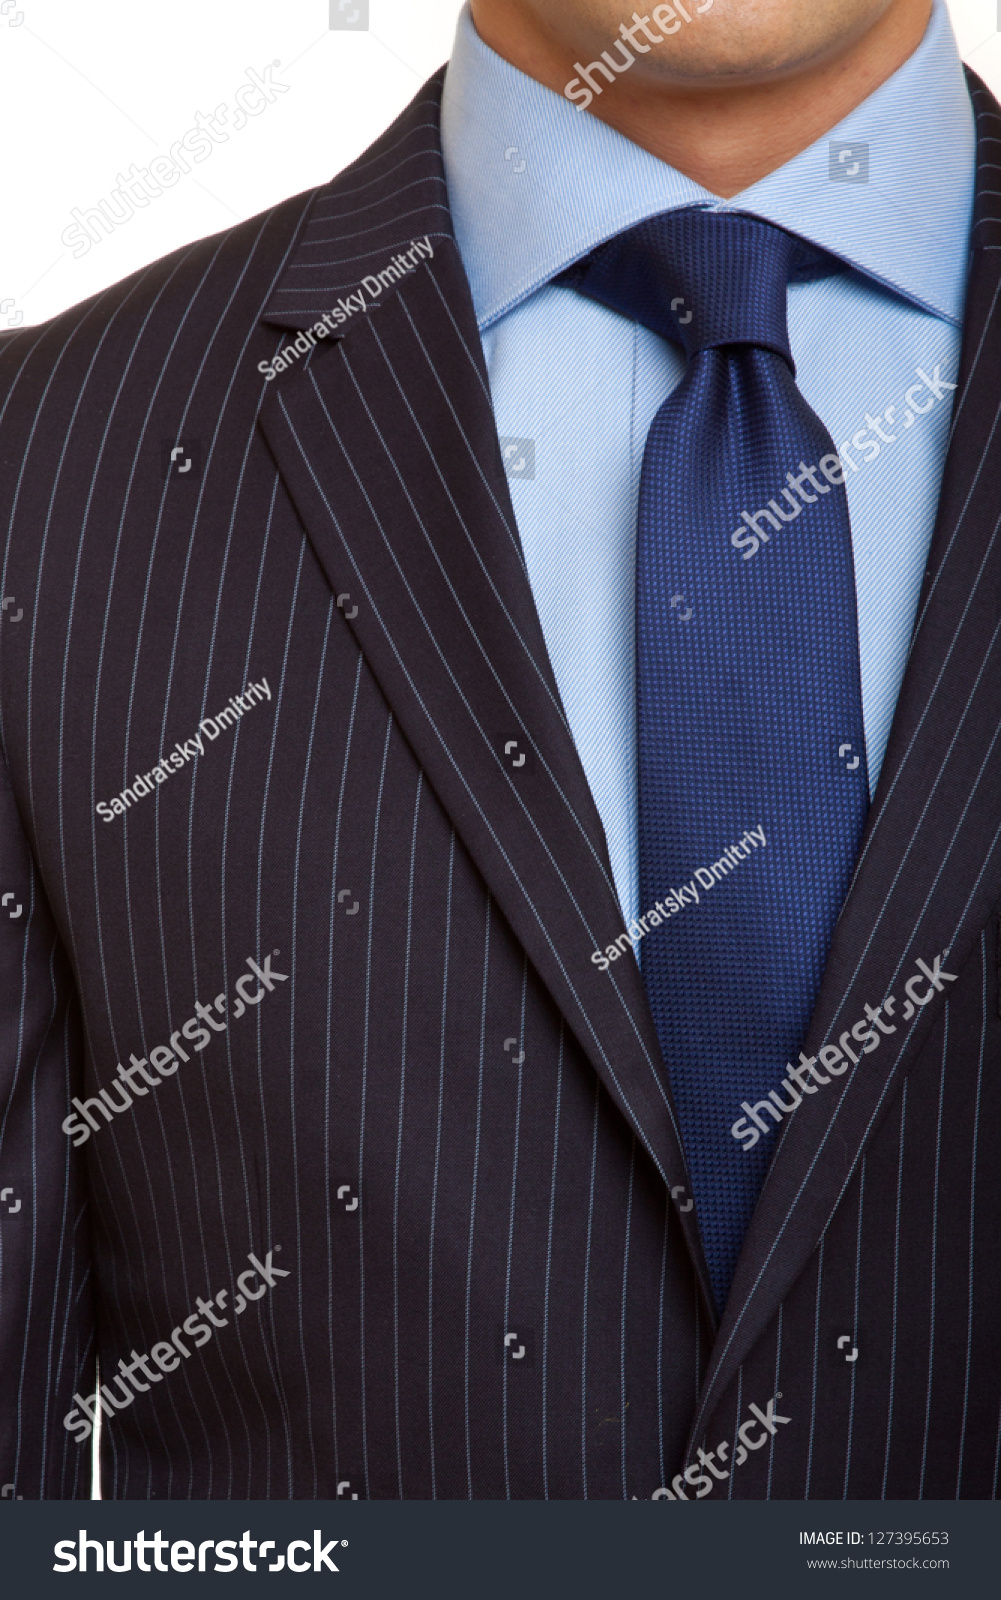 Black Suit With Blue Tie Stock Photo 127395653 : Shutterstock